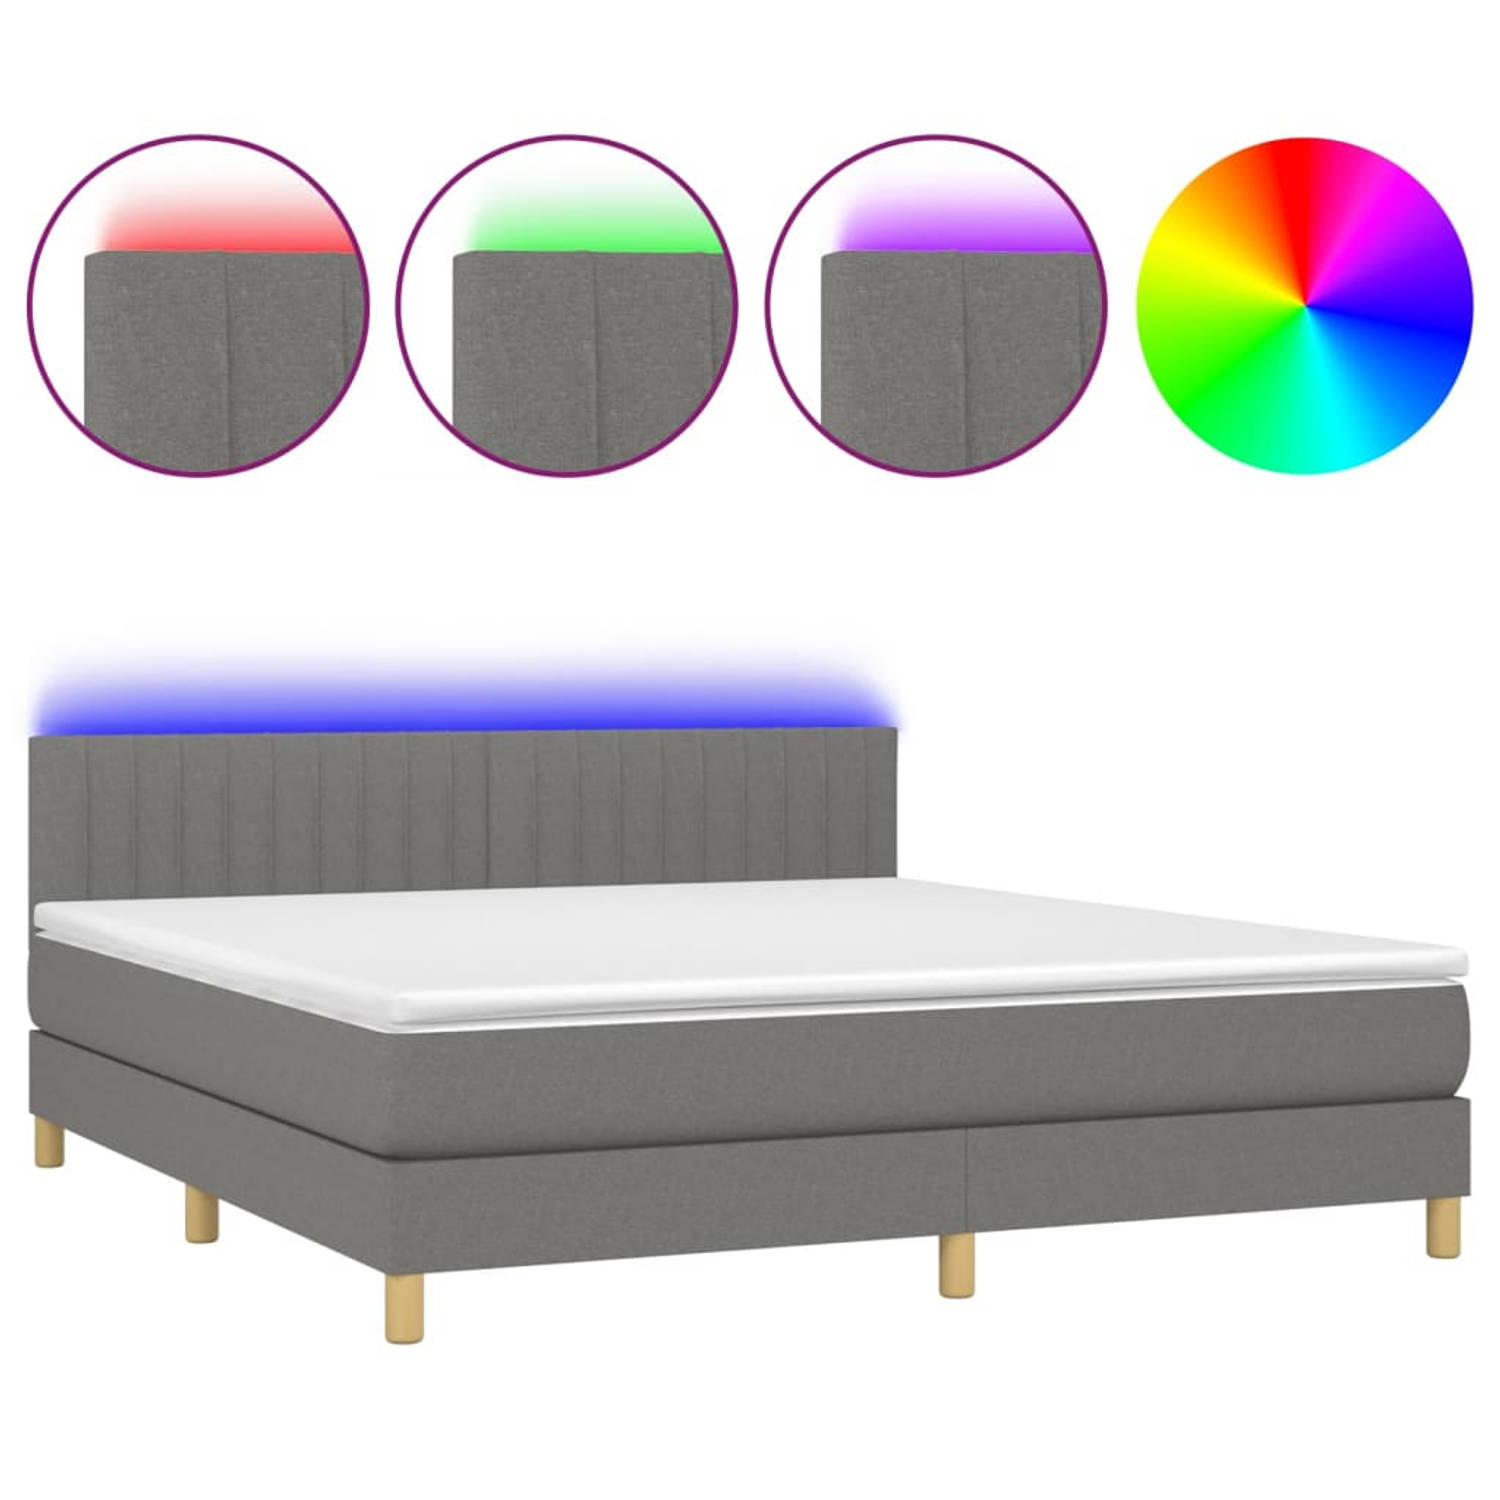 The Living Store Boxspring met matras en LED stof donkergrijs 180x200 cm - Boxspring - Boxsprings - Bed - Slaapmeubel - Boxspringbed - Boxspring Bed - Tweepersoonsbed - Bed Met Mat